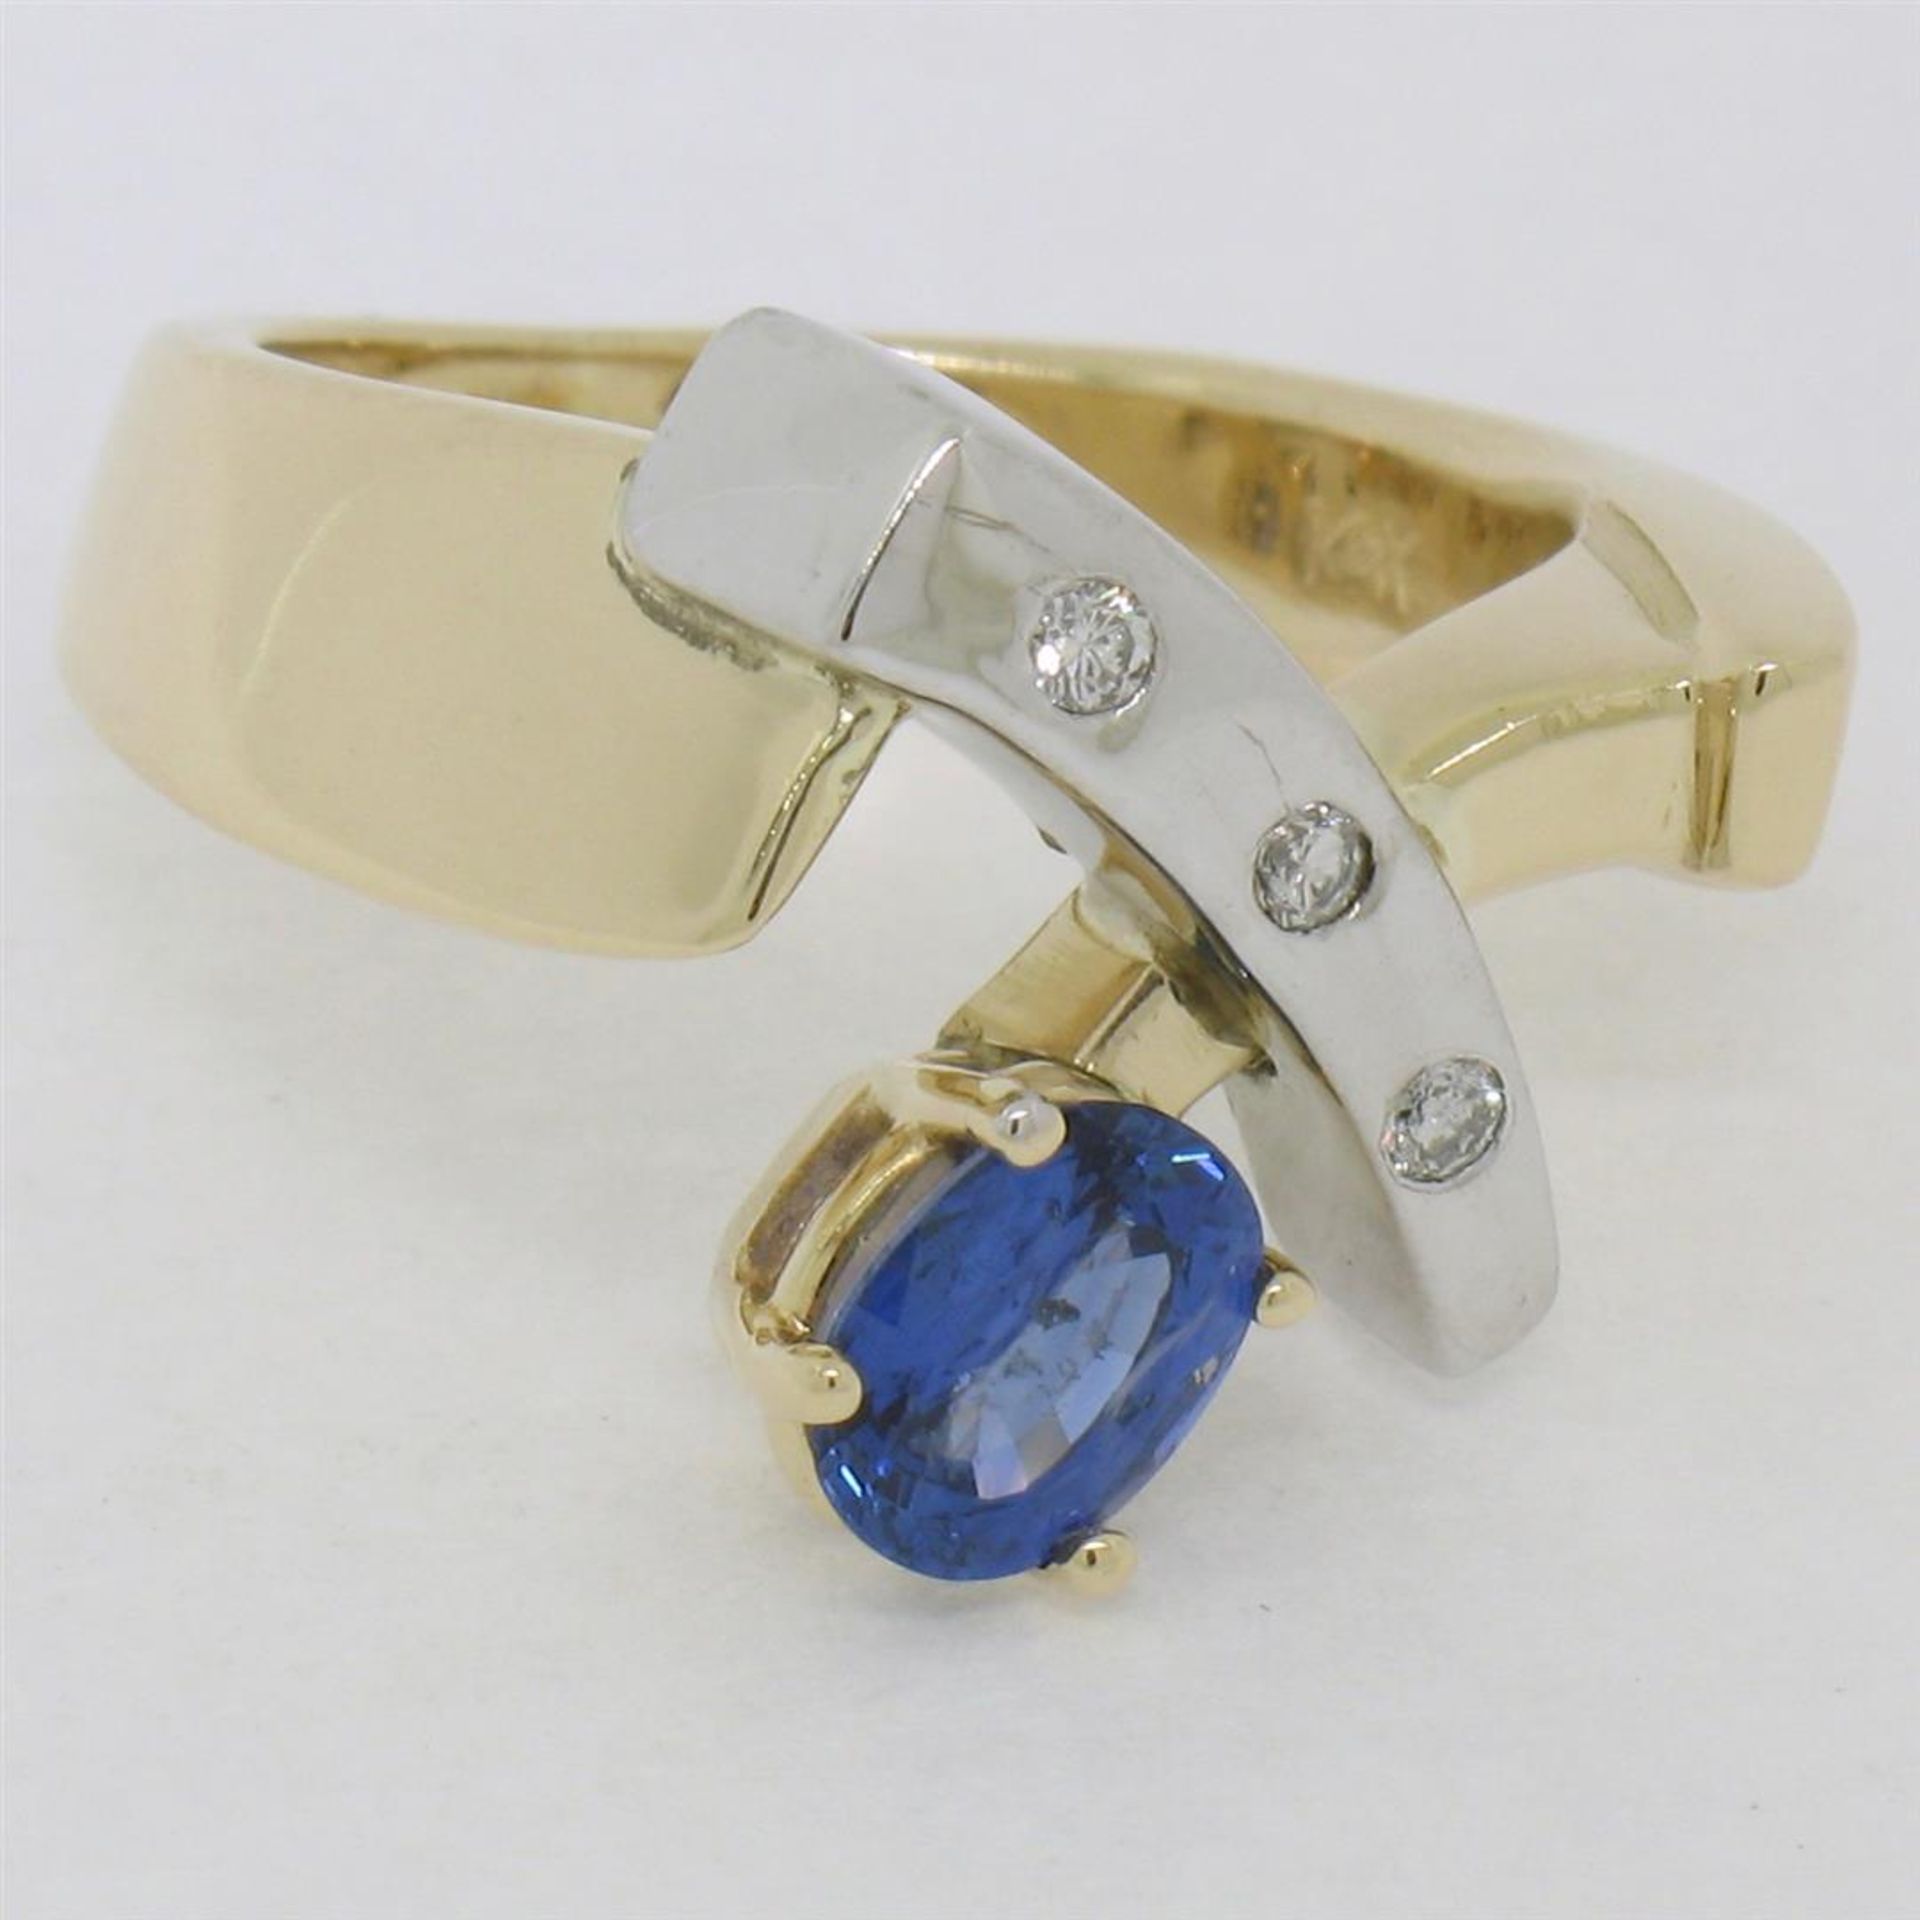 Two Tone 14K Gold 0.98ctw QUALITY Sapphire Solitaire Ring w/ 3 Diamond Accents - Image 3 of 7